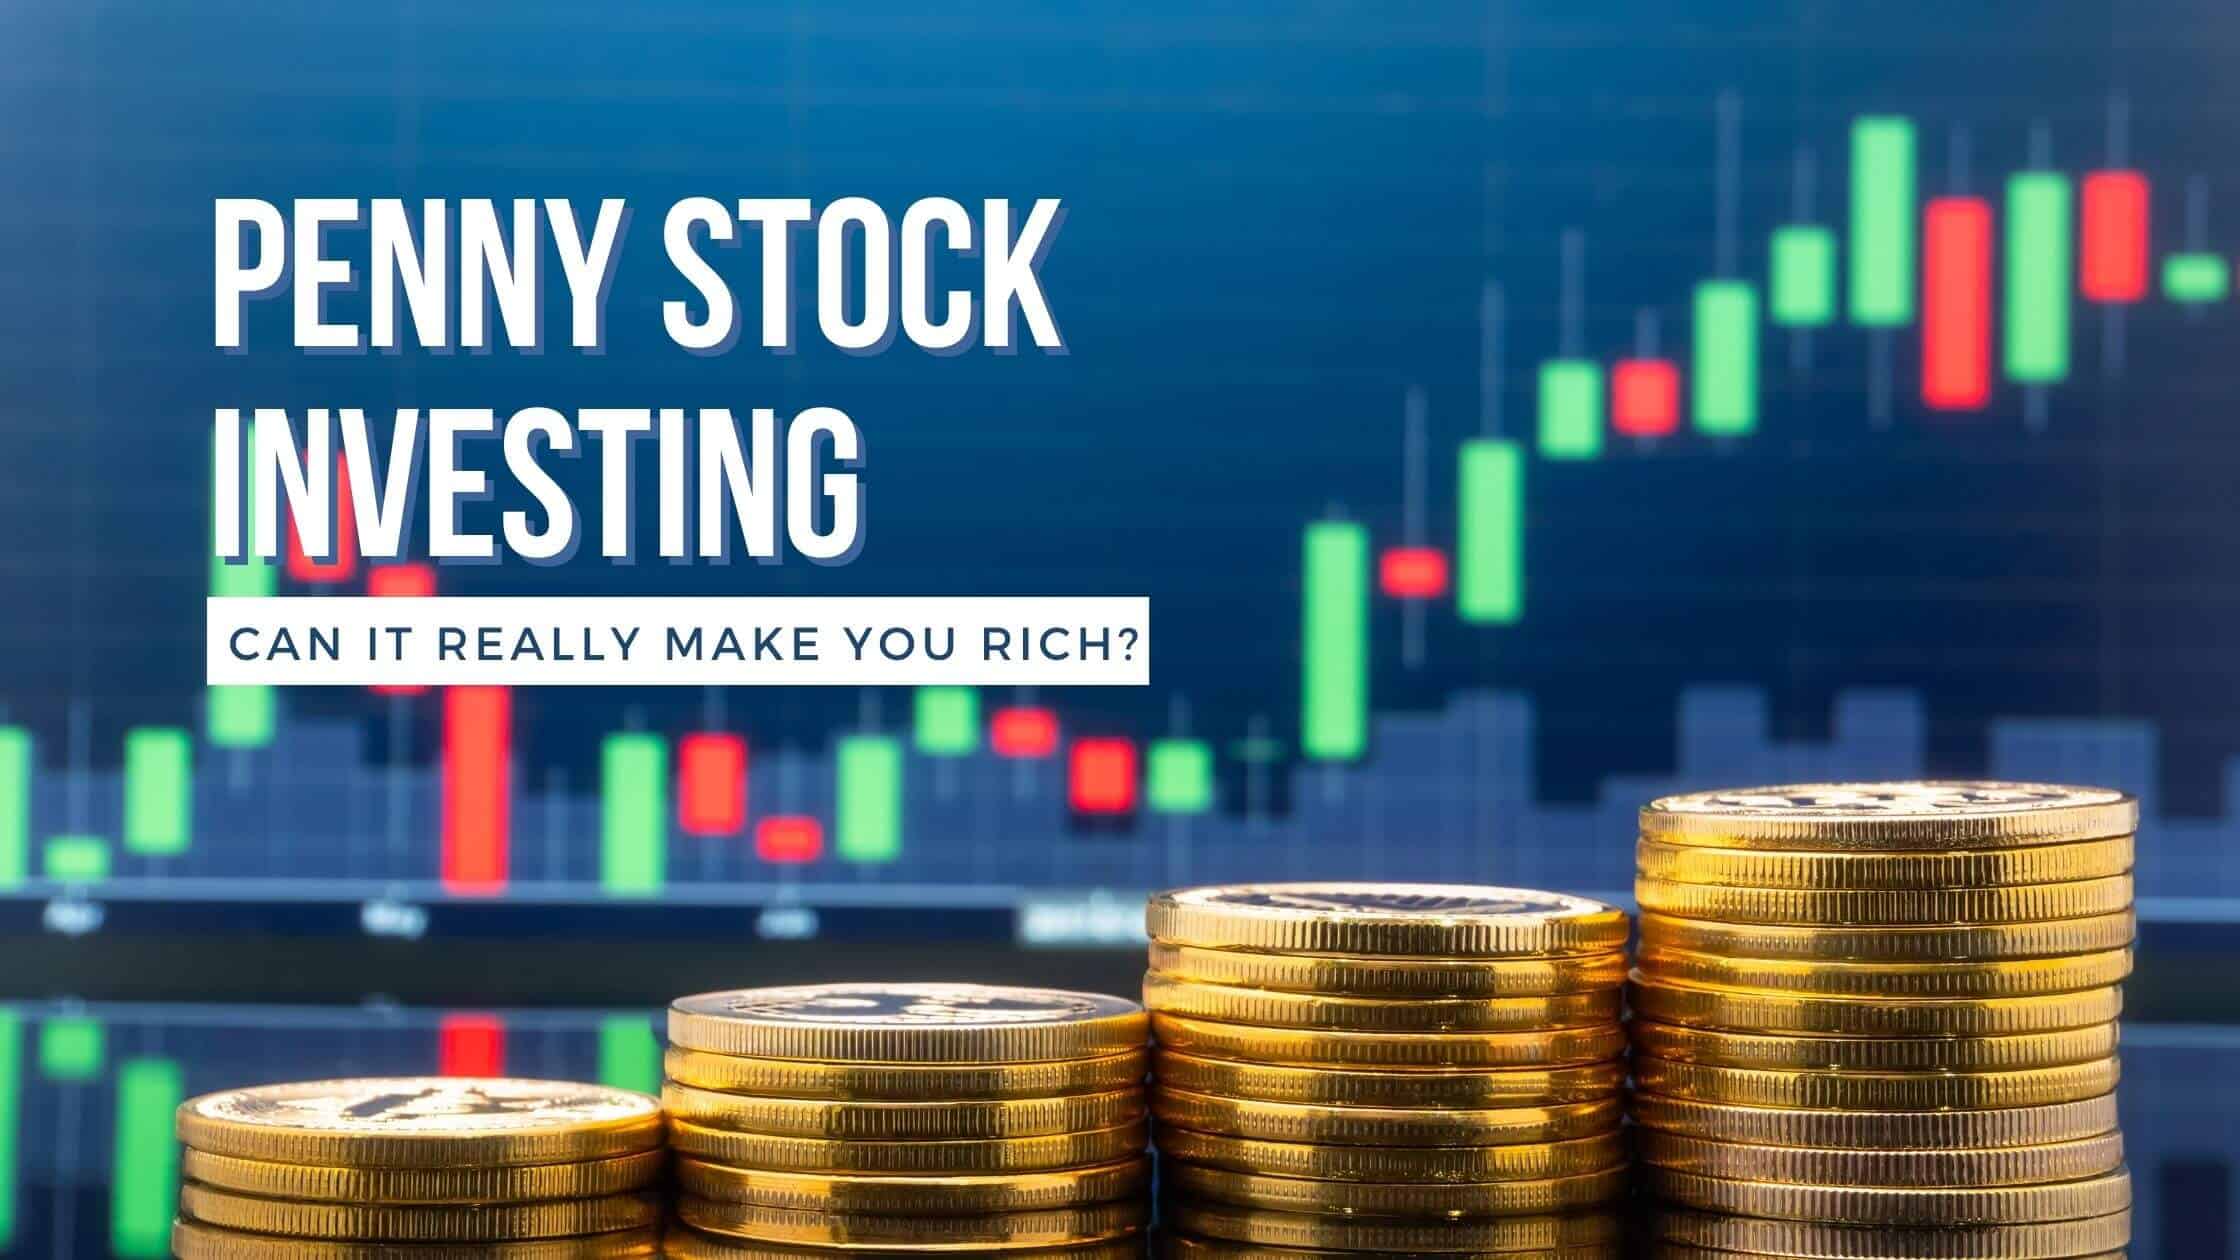 Penny Stock Investing Can It Really Make You Rich?